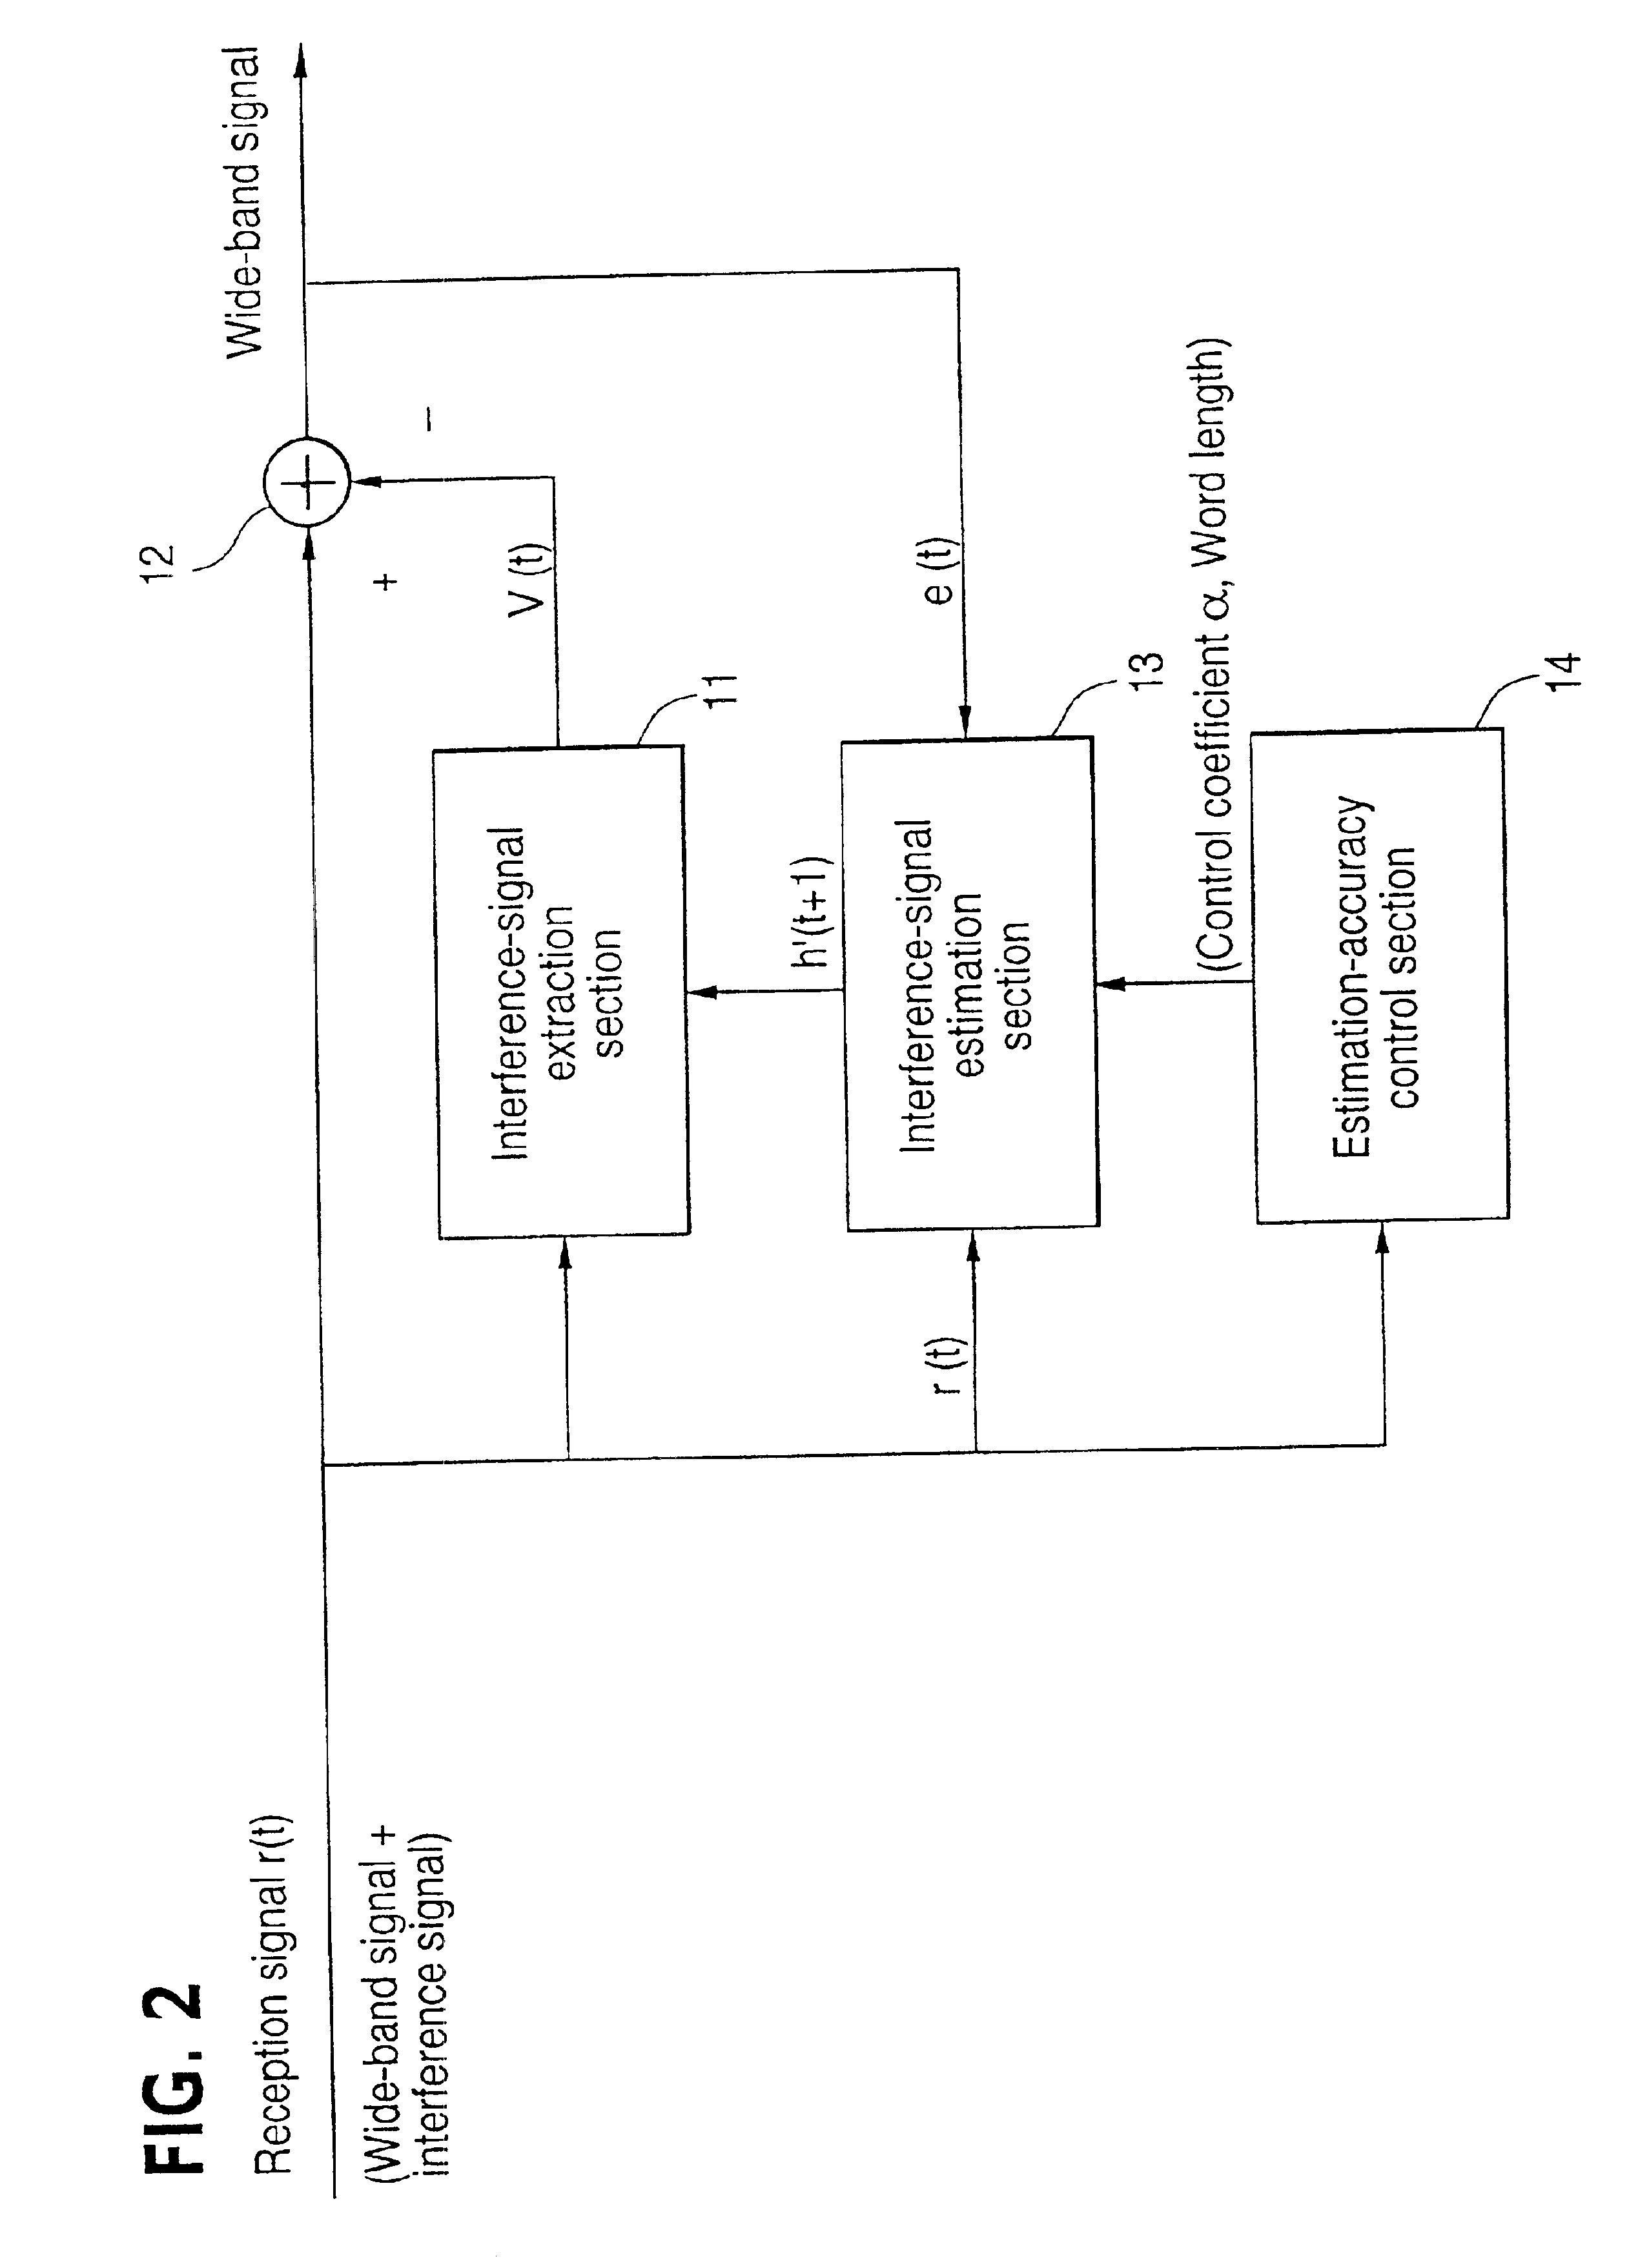 Interference-signal removing apparatus